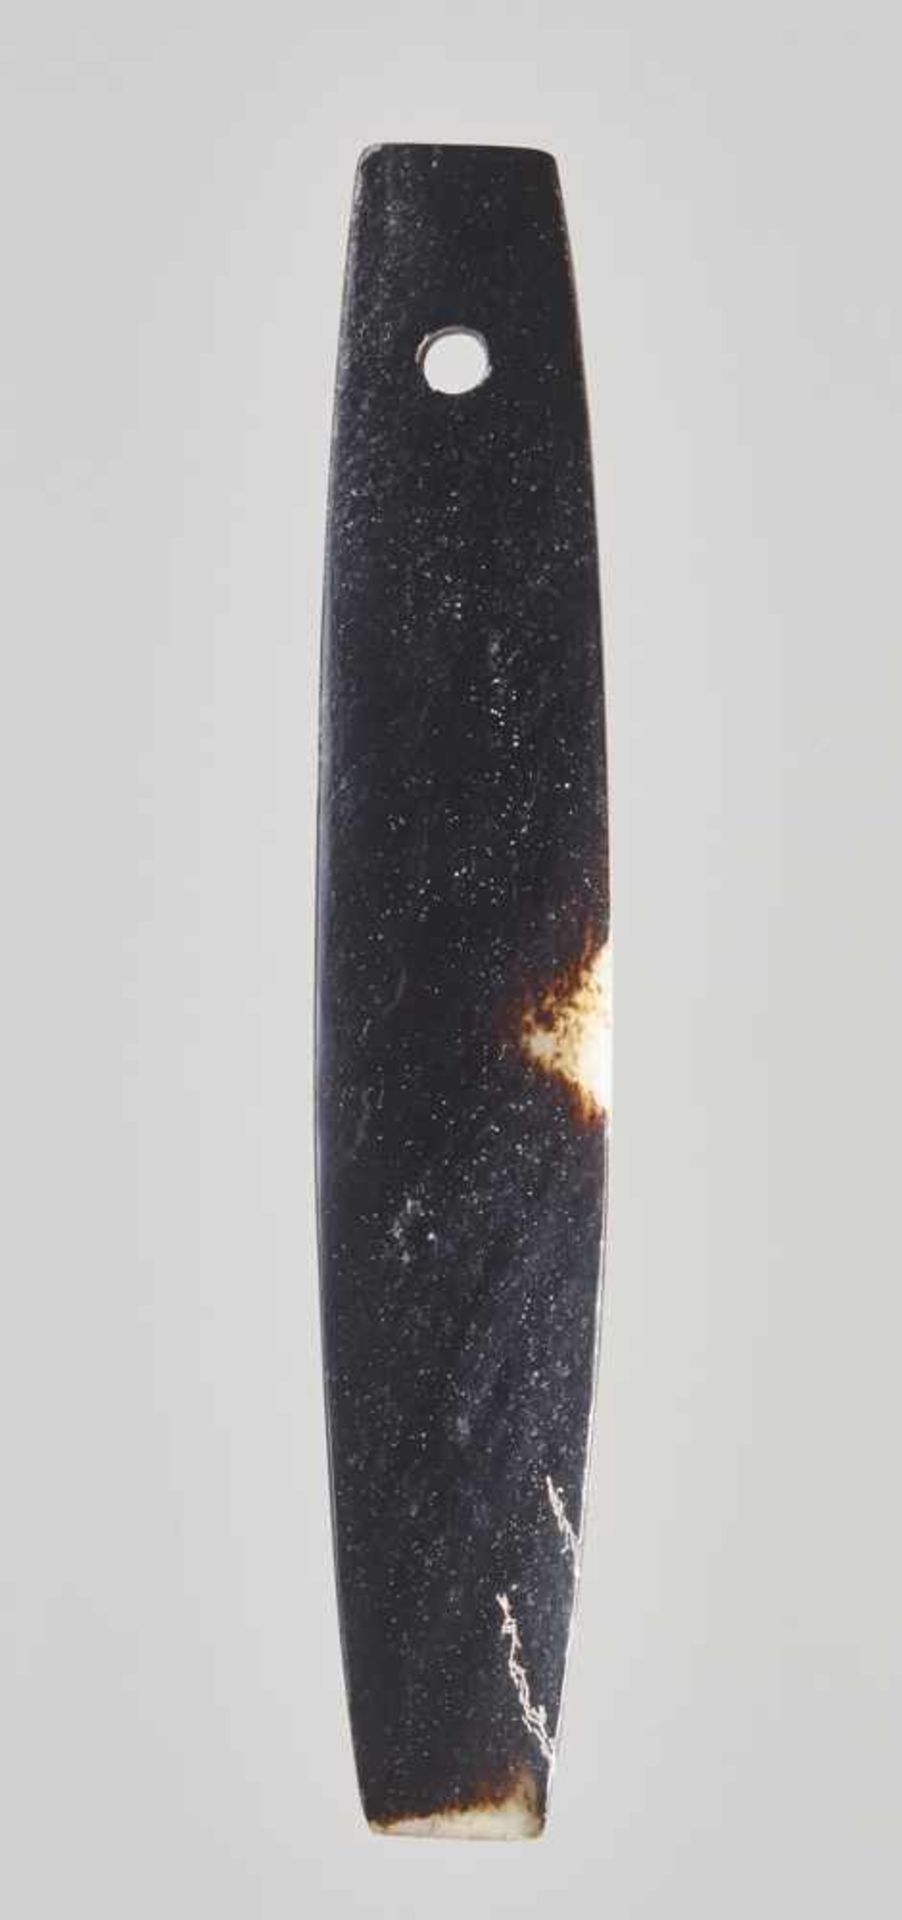 A FASCINATING AND RARE BLACK AND WHITE SLENDER BEN ADZE Jade. China, Early Bronze Age, Qijia - Image 2 of 5